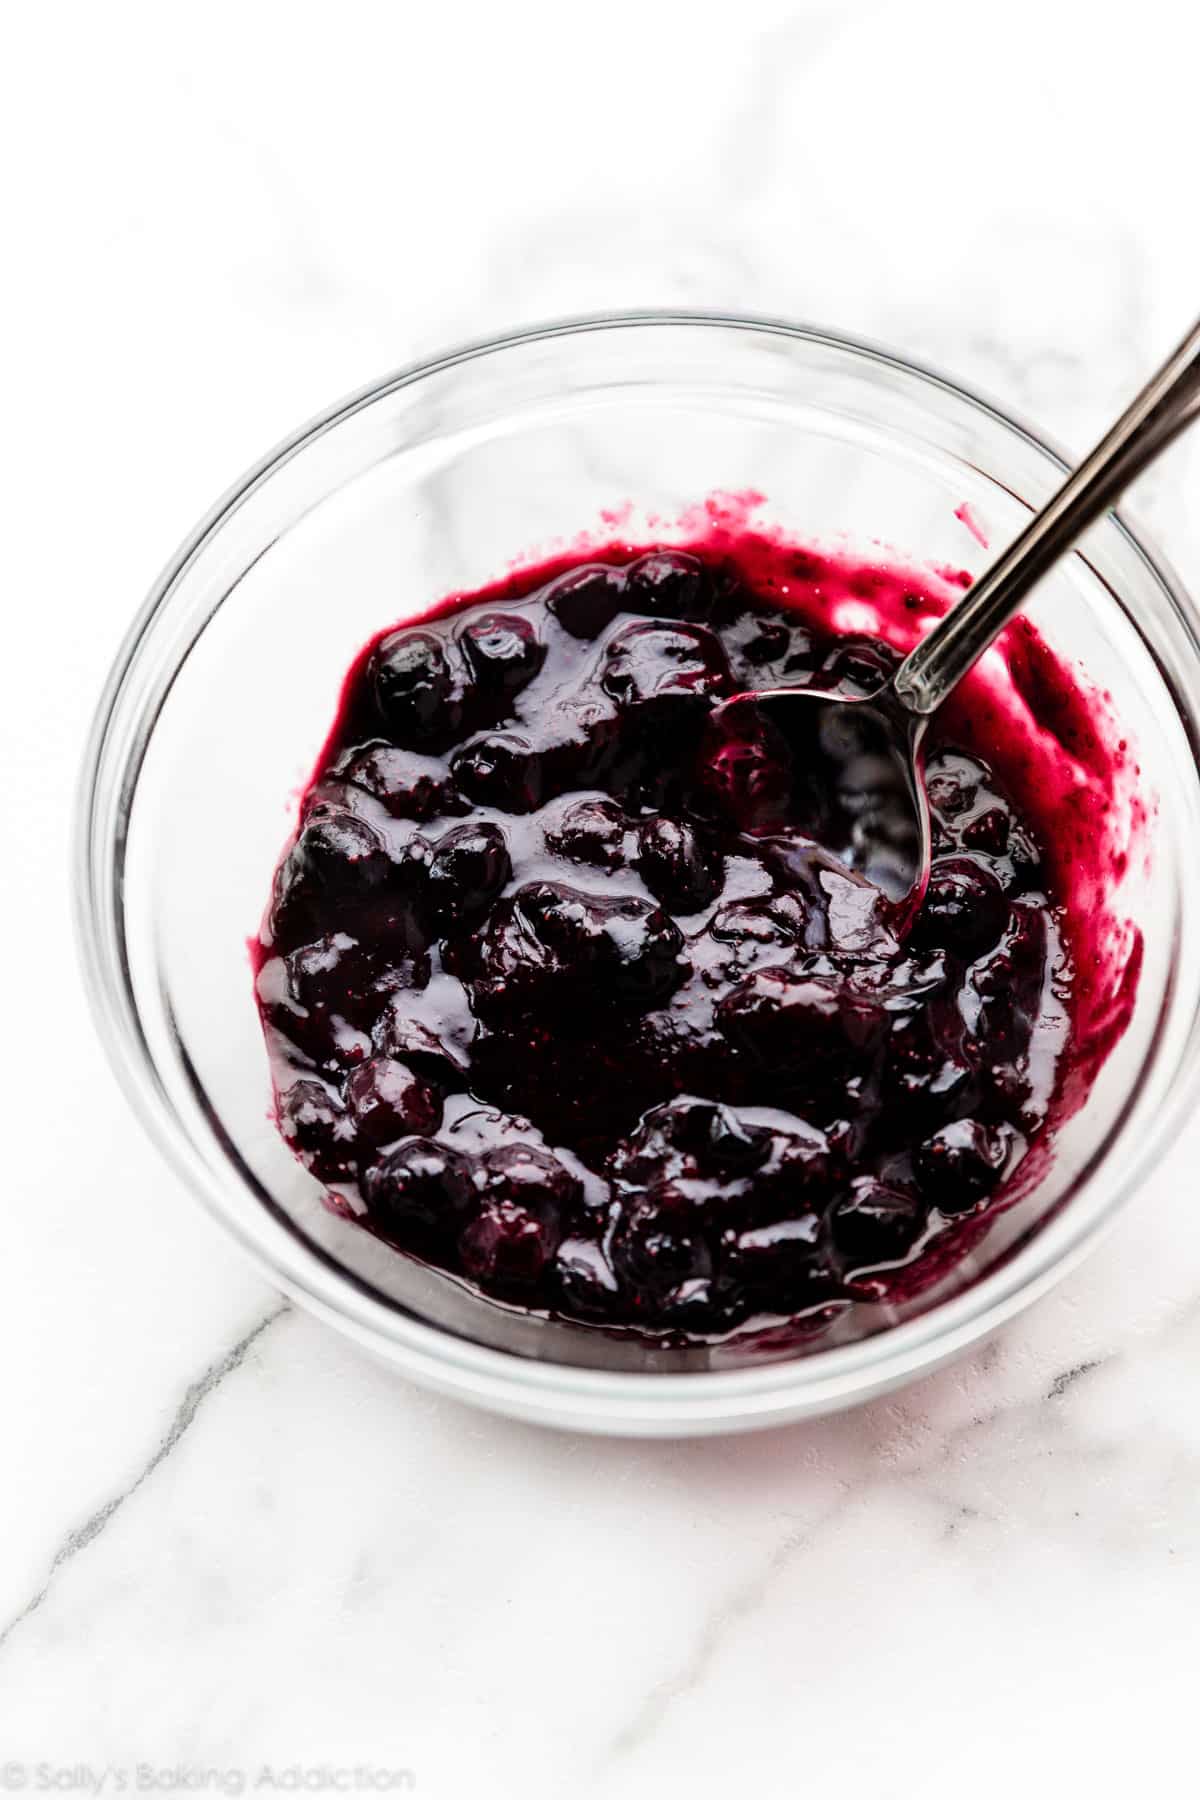 homemade blueberry sauce in a glass bowl